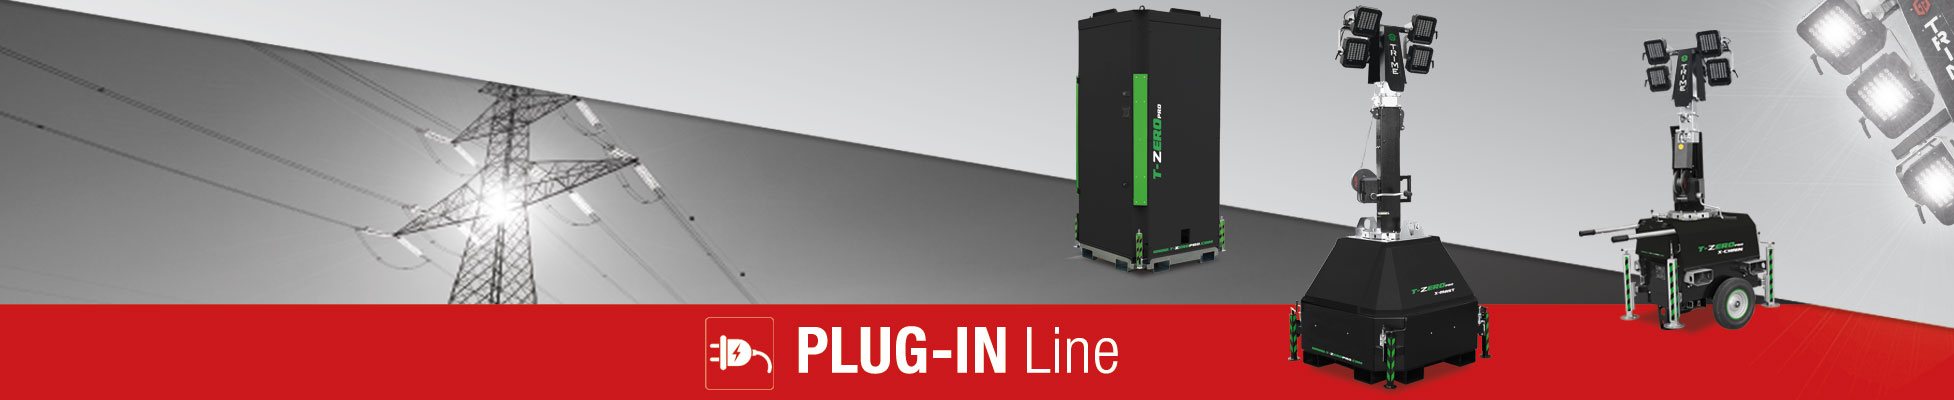 Plug-In Line